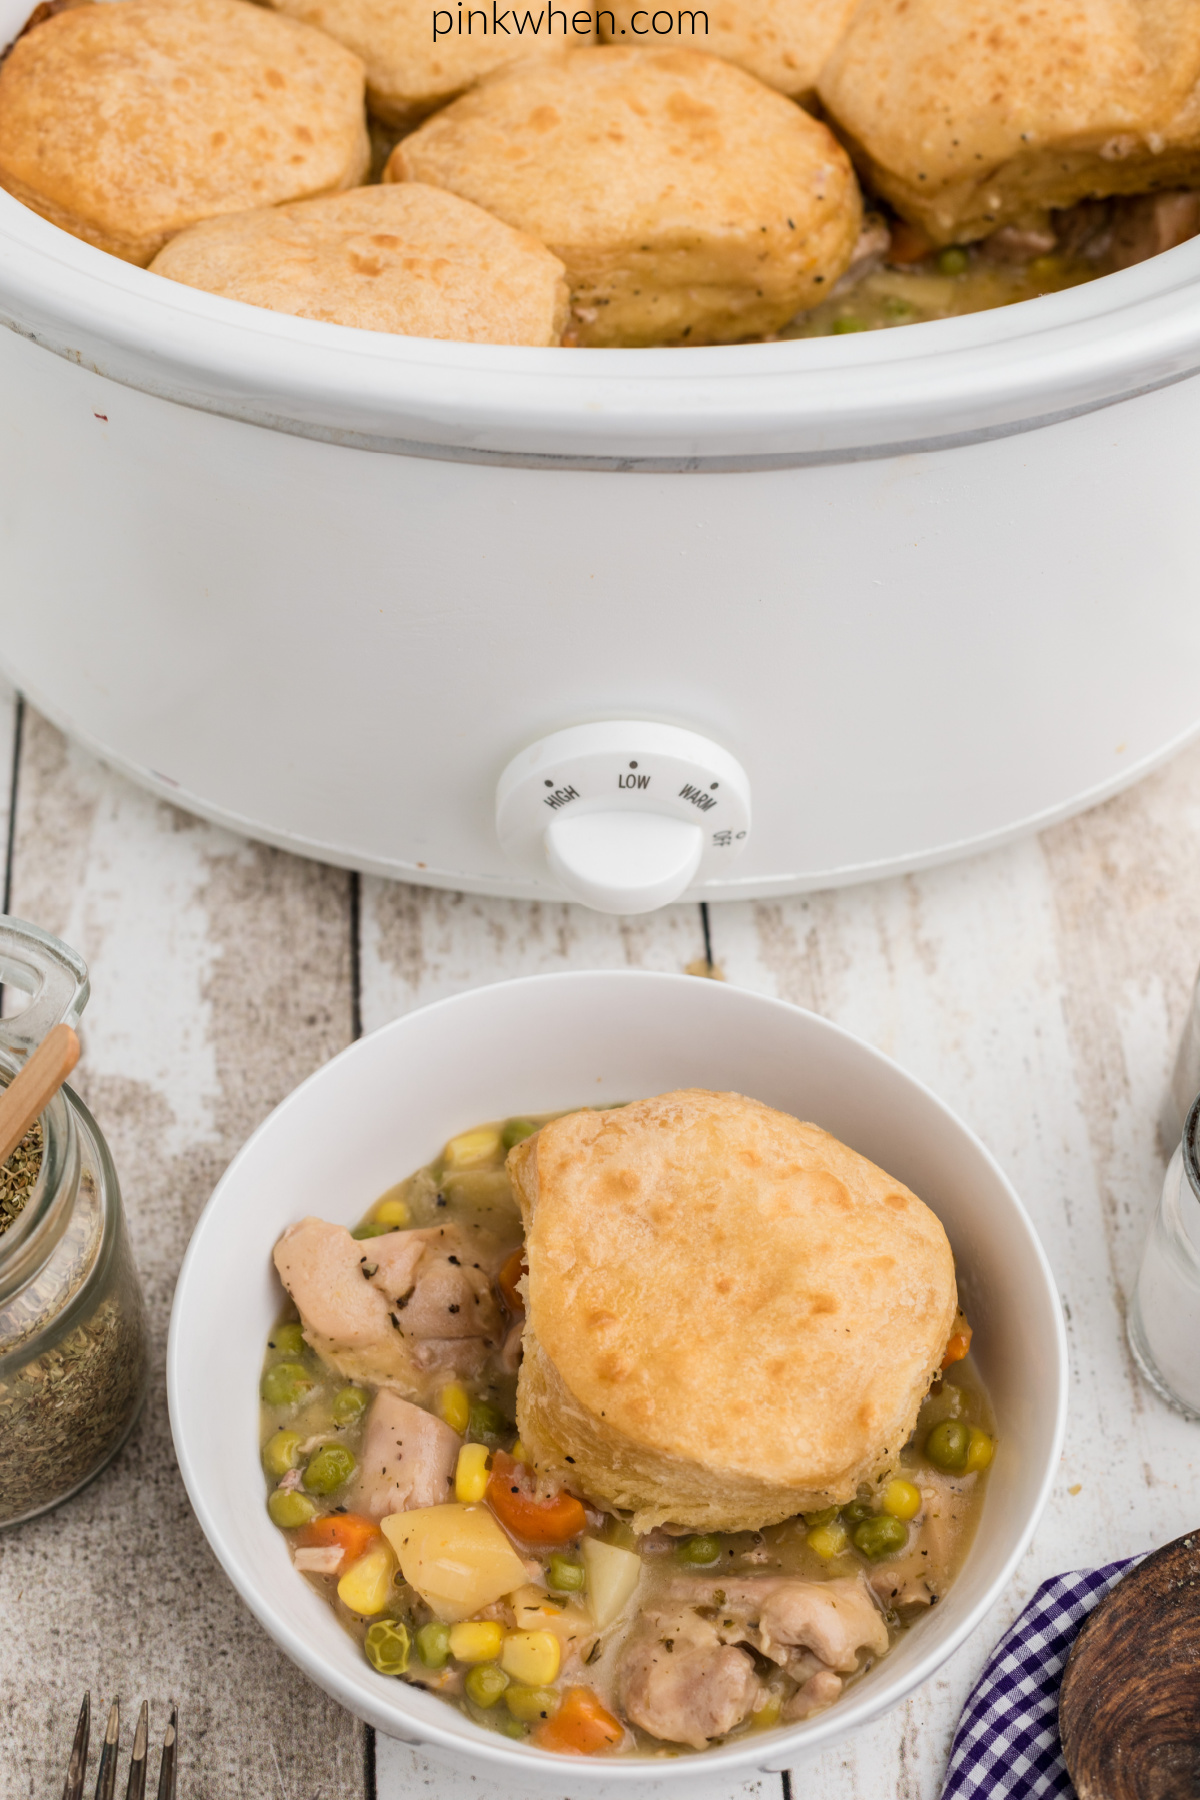 Chicken pot pie with biscuit topping in a bowl, with the slow cooker in the background.